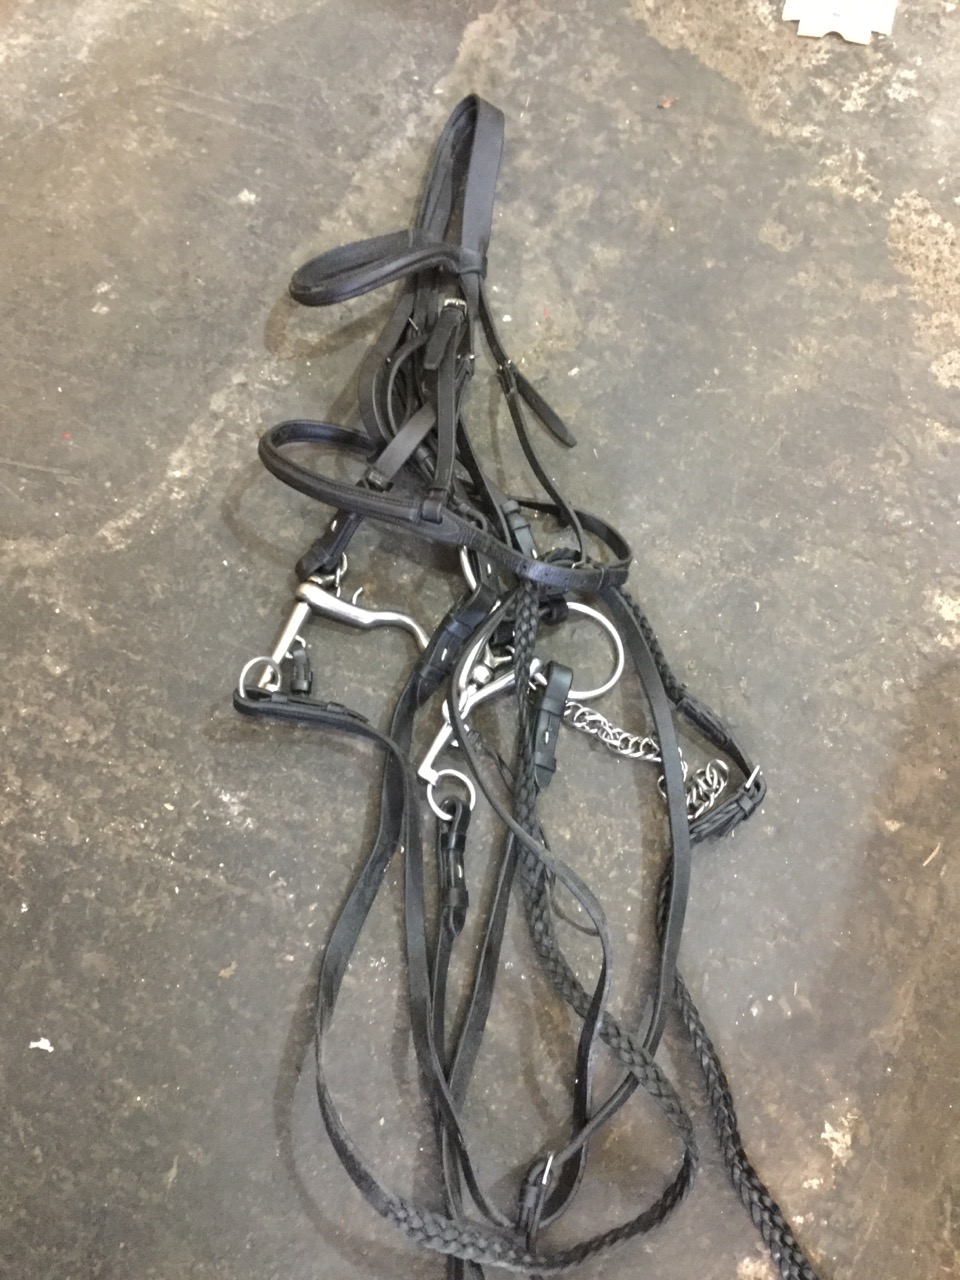 A quantity of horse tack - complete bridles, stirrups, girths, surcingles, brow bands, etc. (A lot) - Image 2 of 3